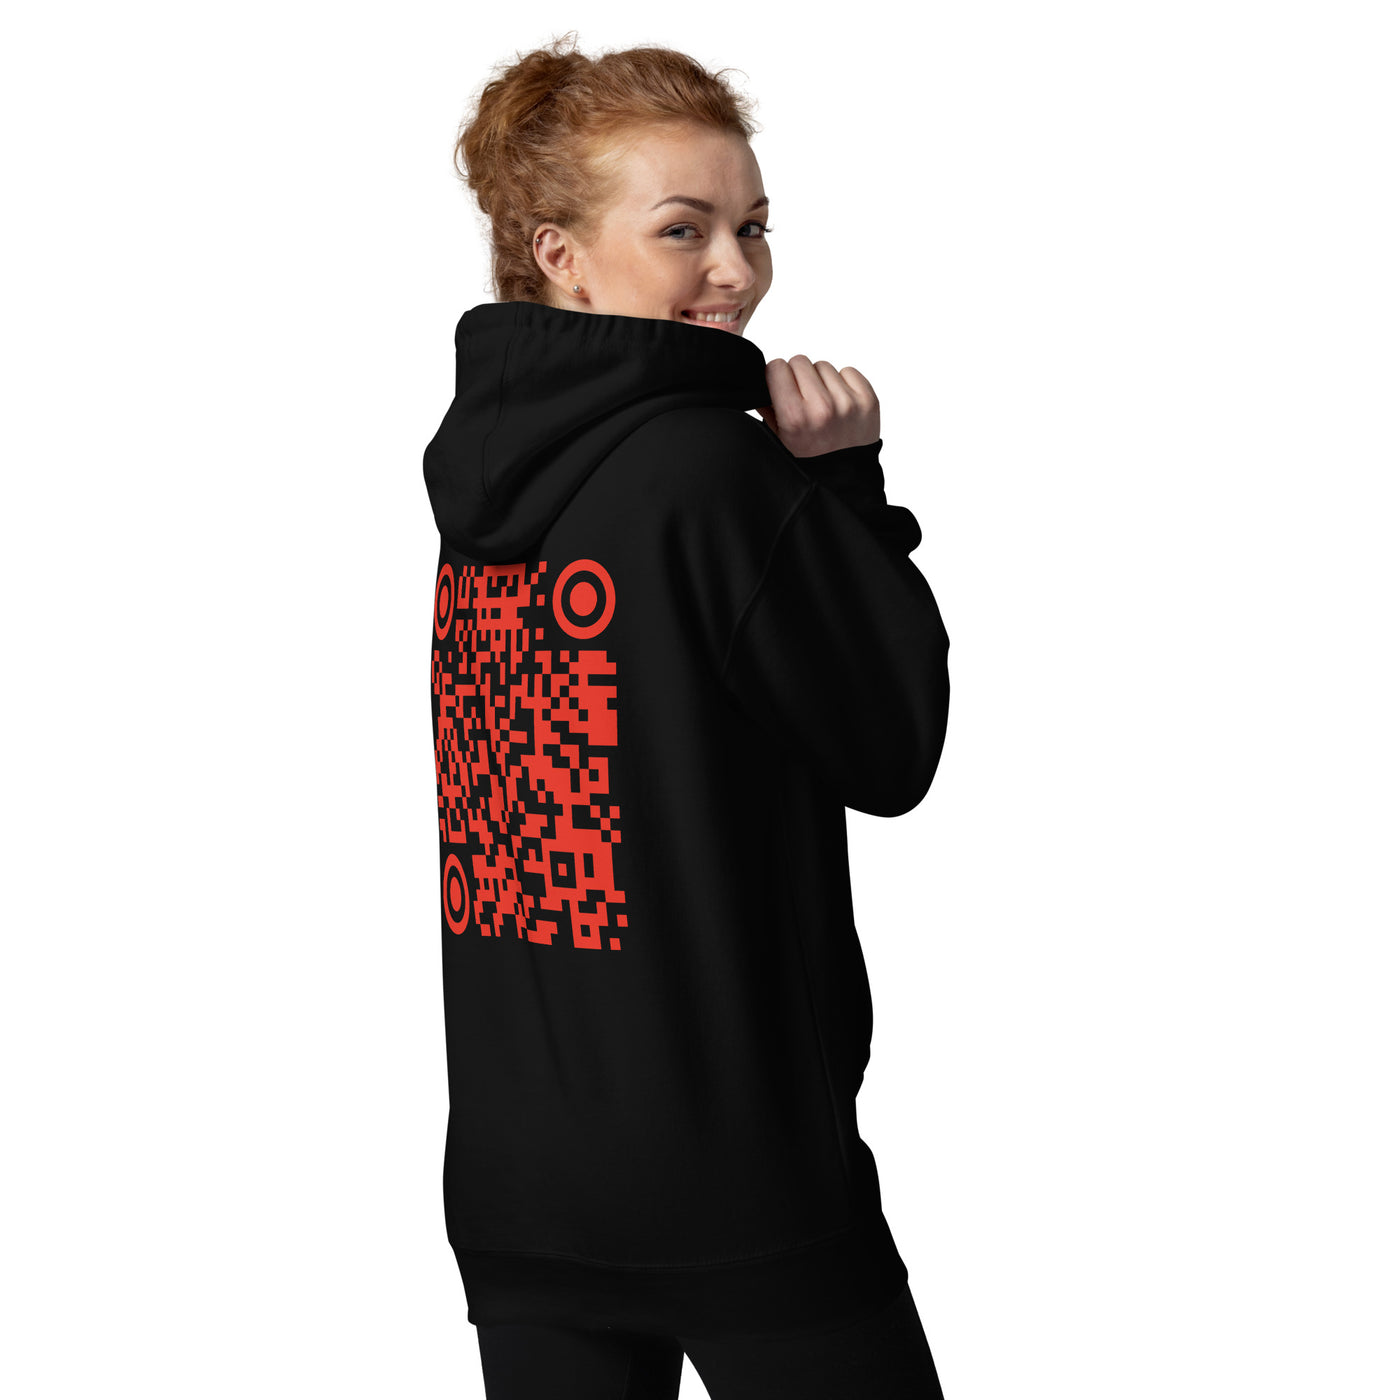 Who's the New Kid, Hacker, Developer, Gamer, Crypto King V1  - Unisex Hoodie Personalized QR Code